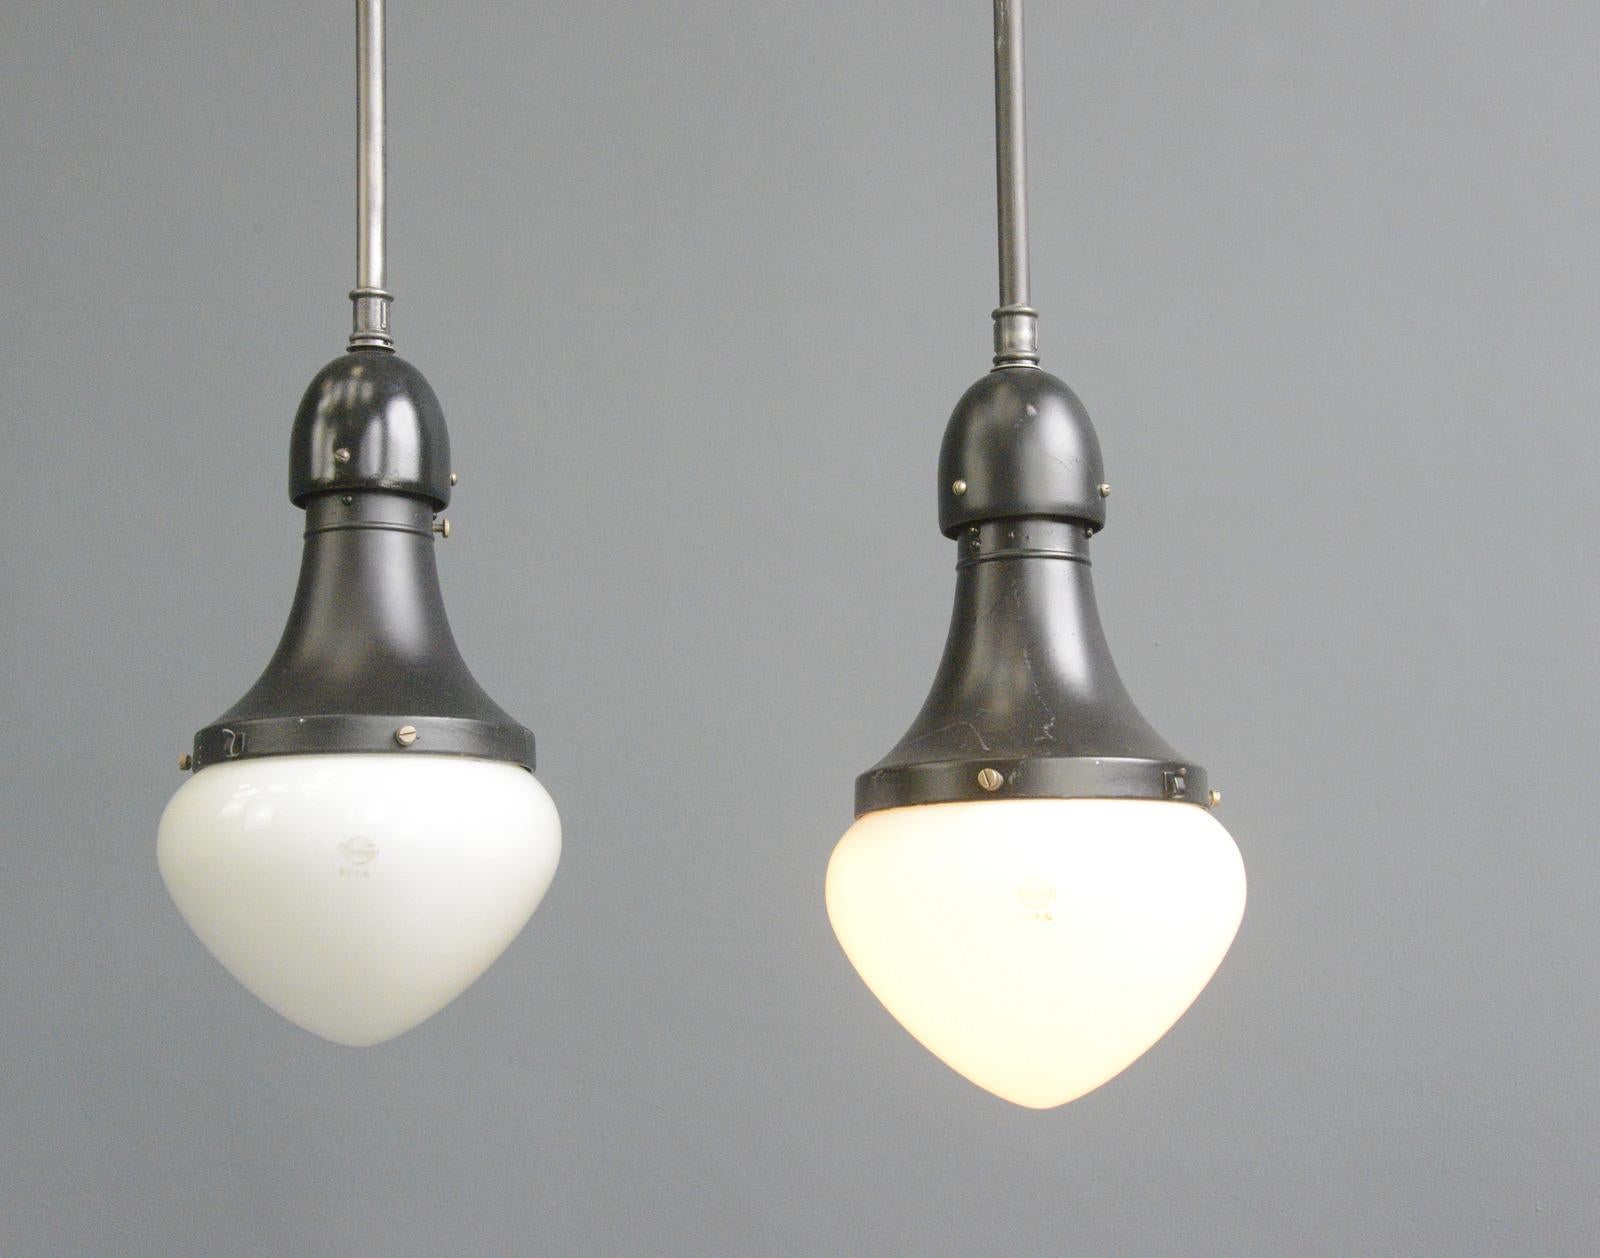 - Opaline glass shades.
- Black painted steel tops.
- Takes E27 fitting bulbs.
- Marked 